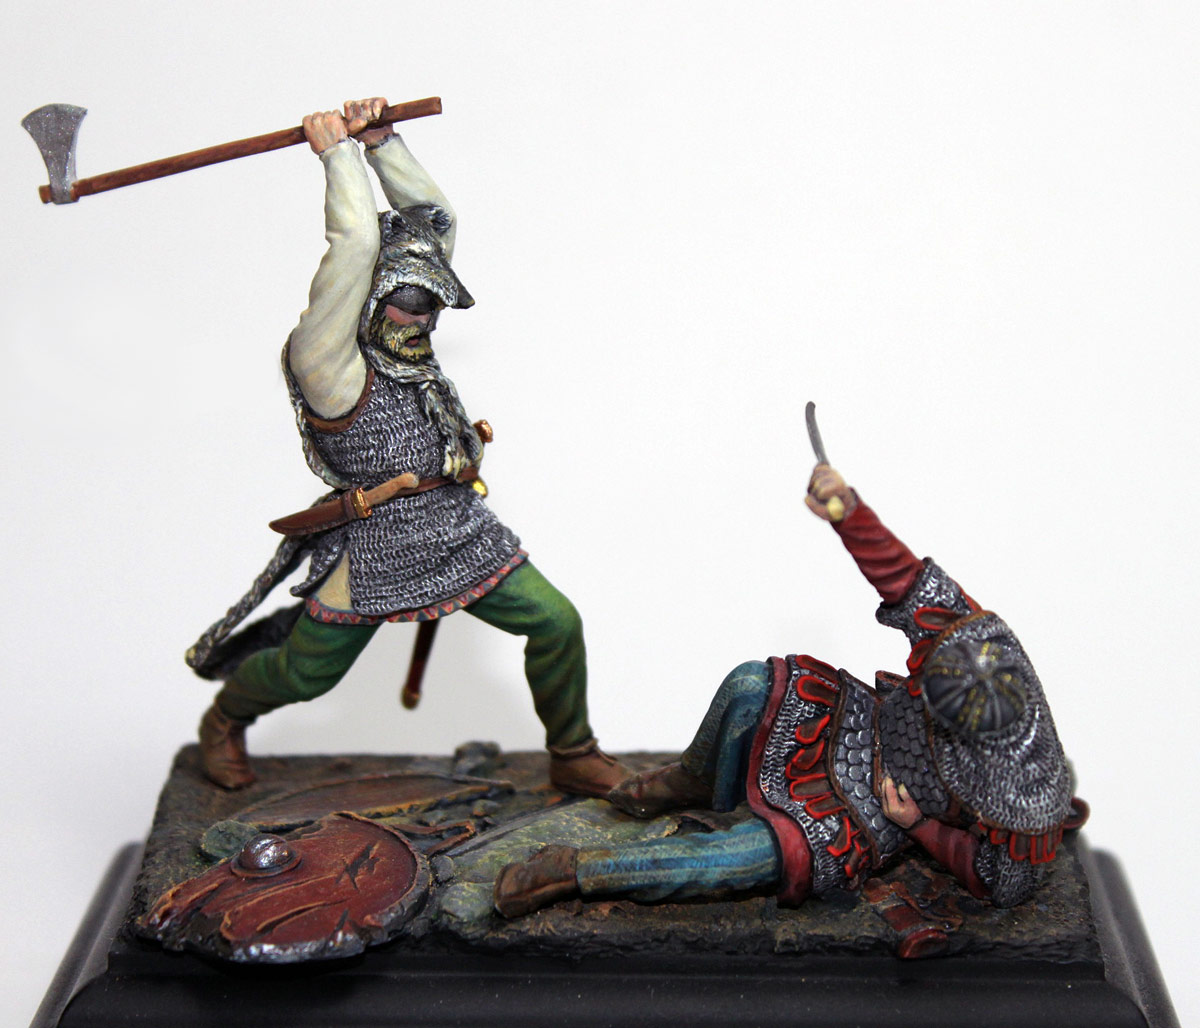 Dioramas and Vignettes: The Duel, photo #2